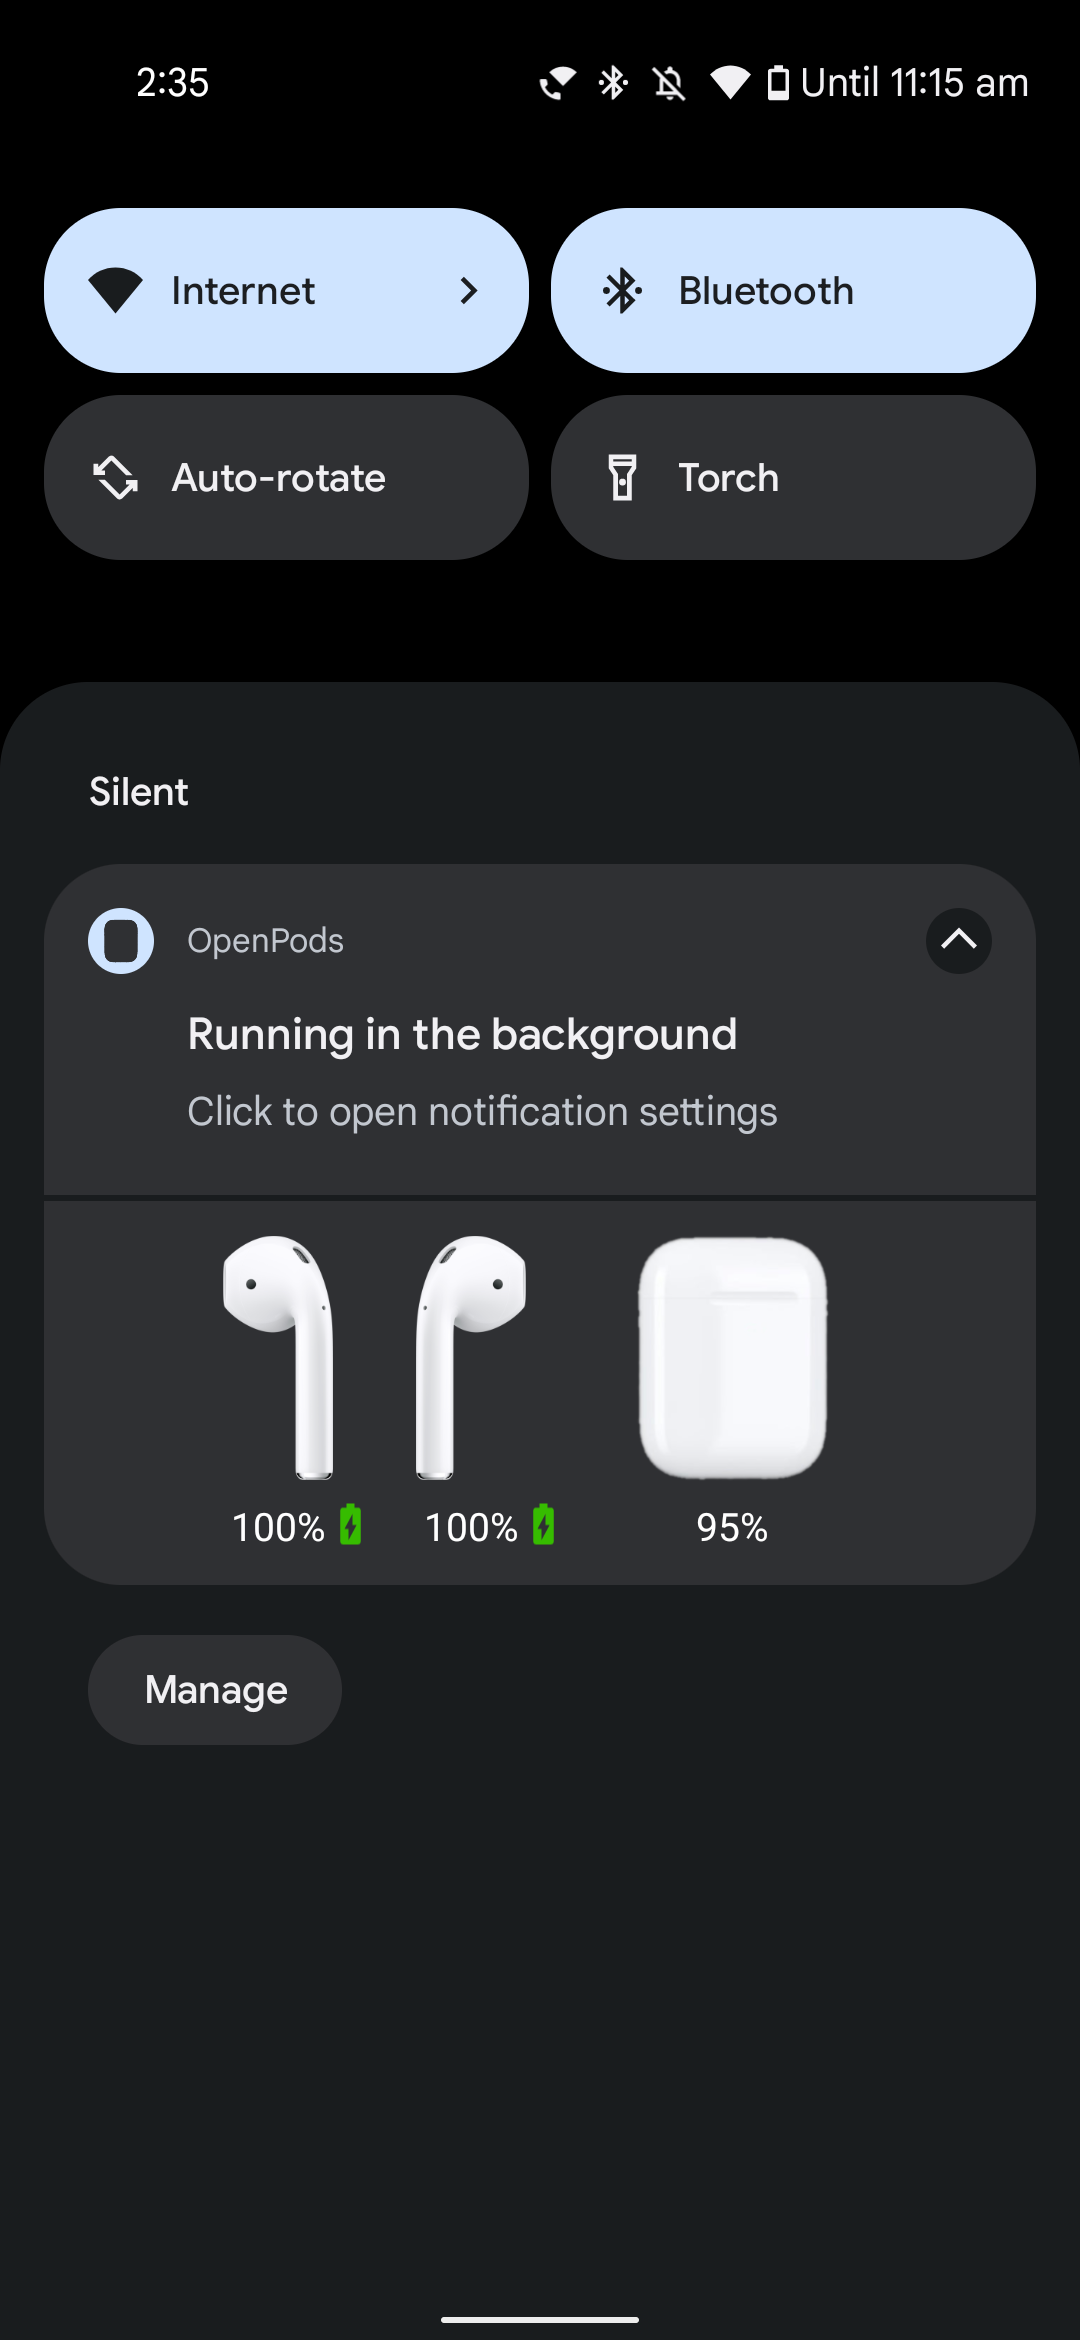 OpenPods showing AirPods battery level notification